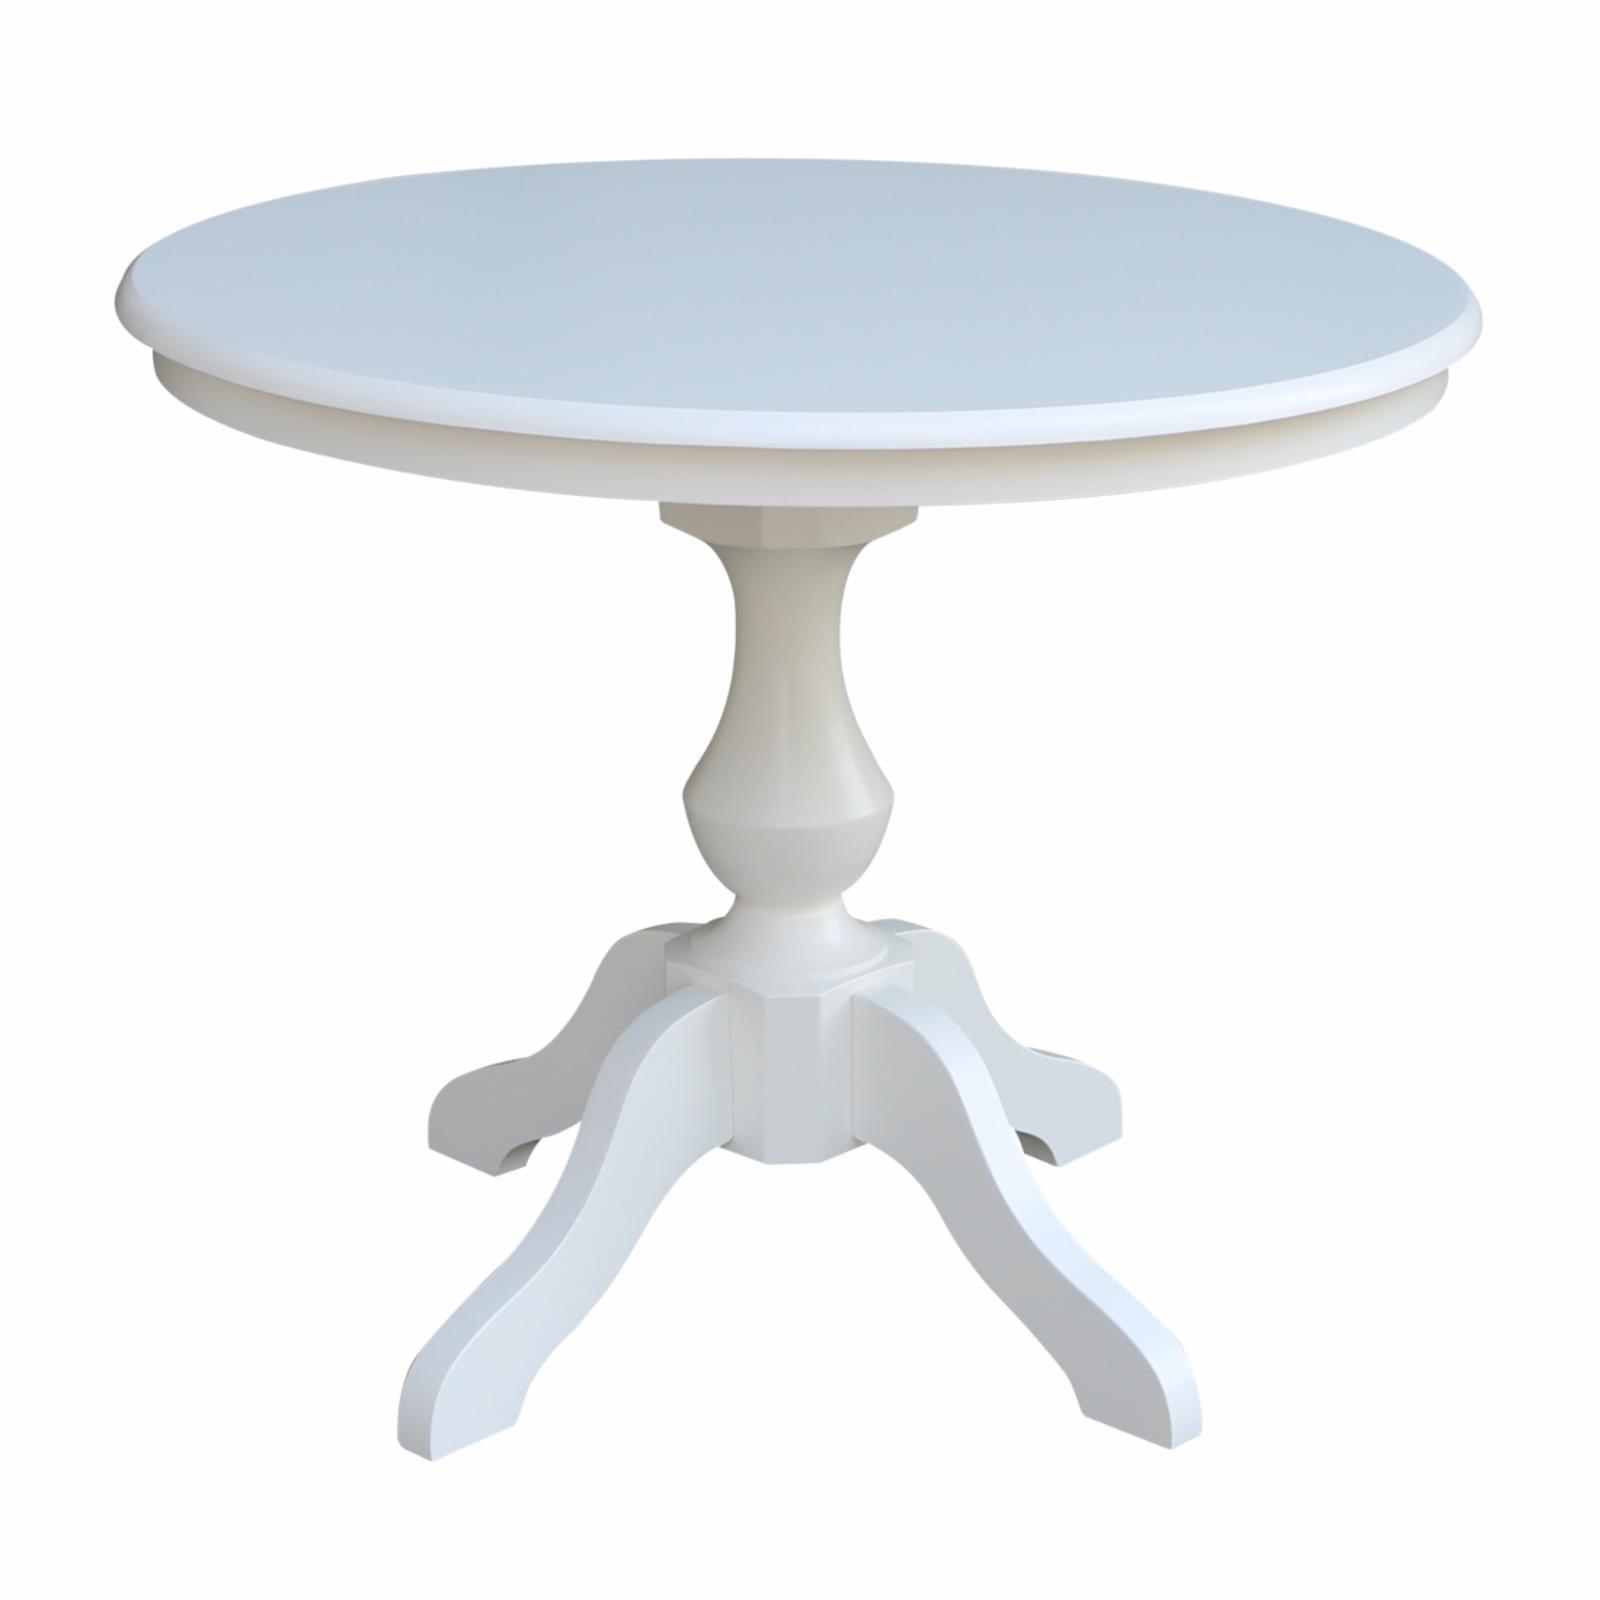 Elegant French Country 36" Round White Wood Dining Table